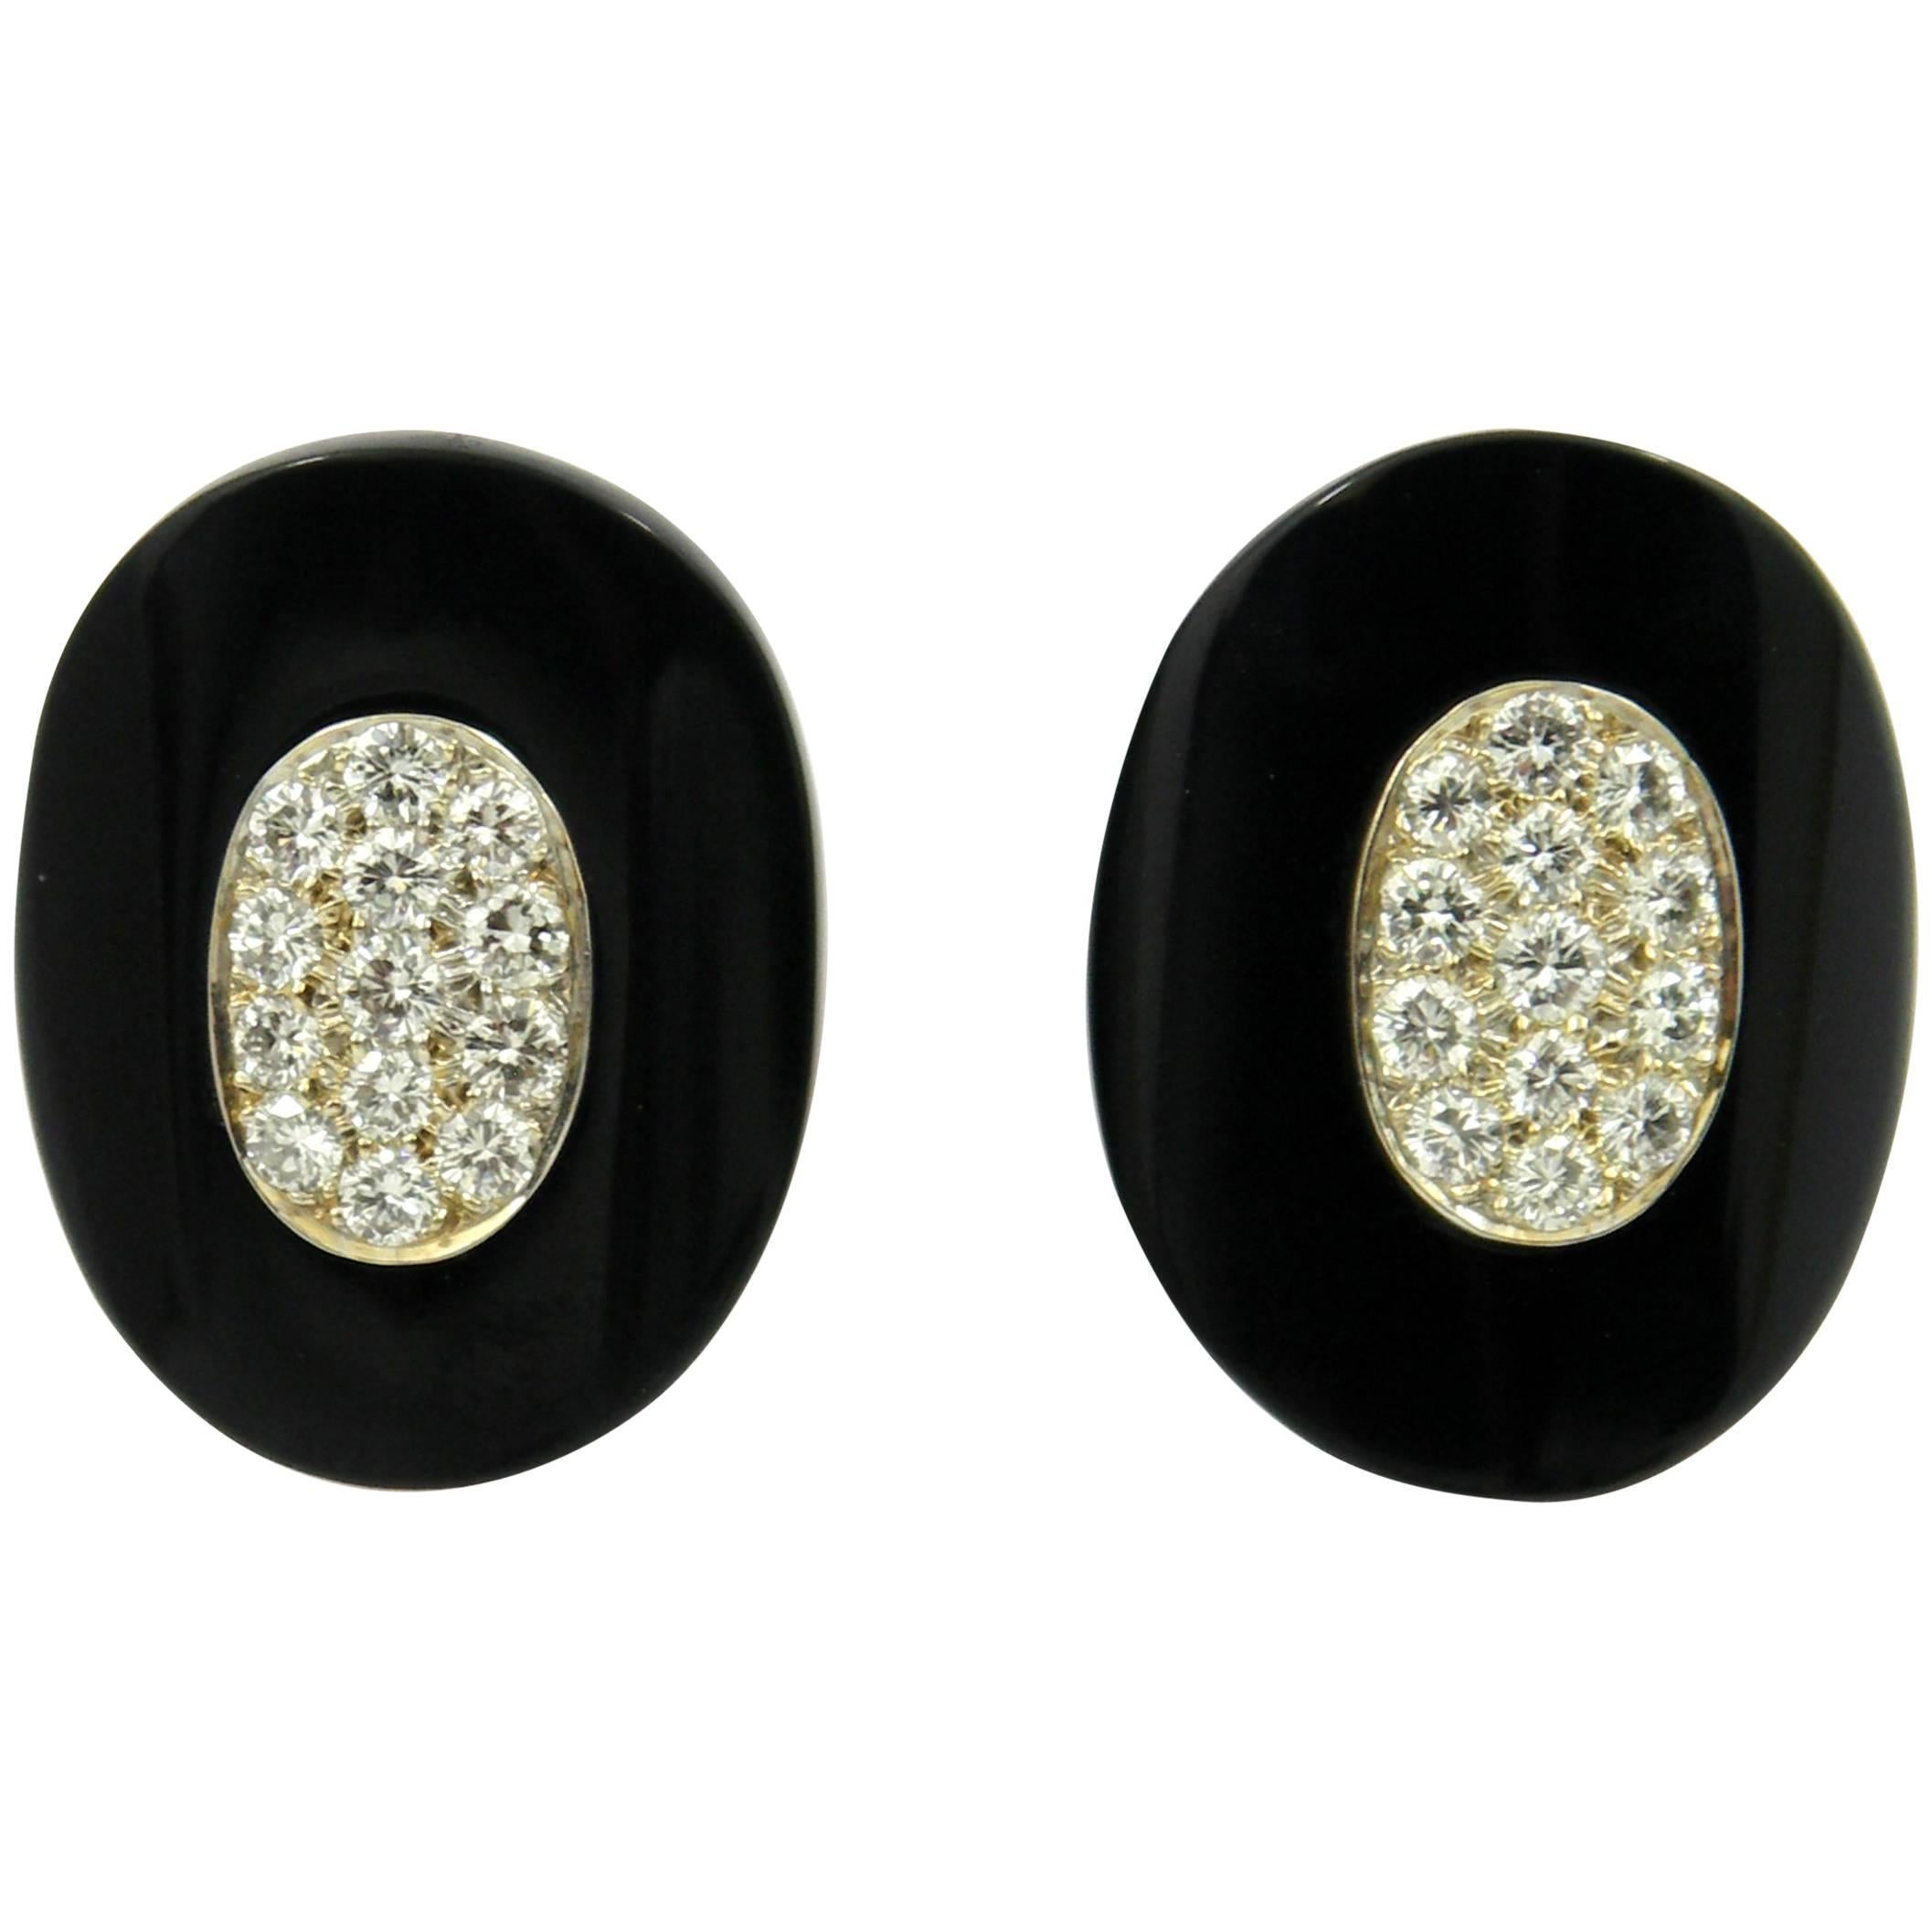 Van Cleef & Arpels Elongated Oval Earrings with Diamonds and Onyx